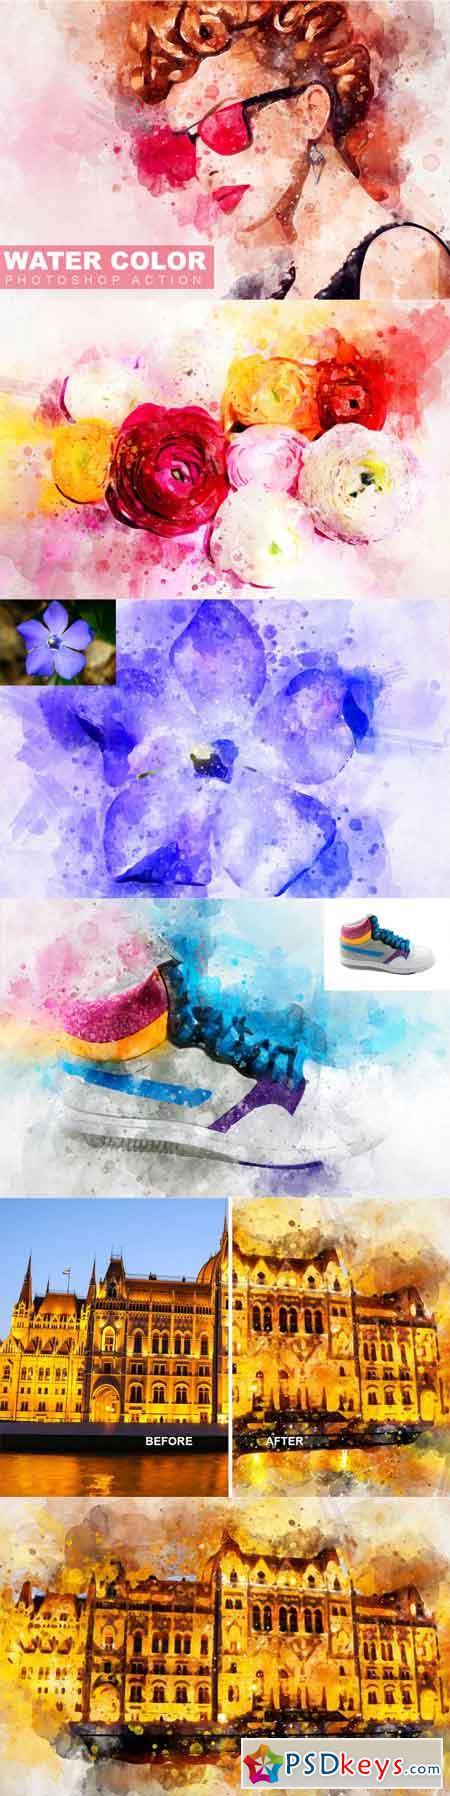 Water Color Photoshop Action 3466438